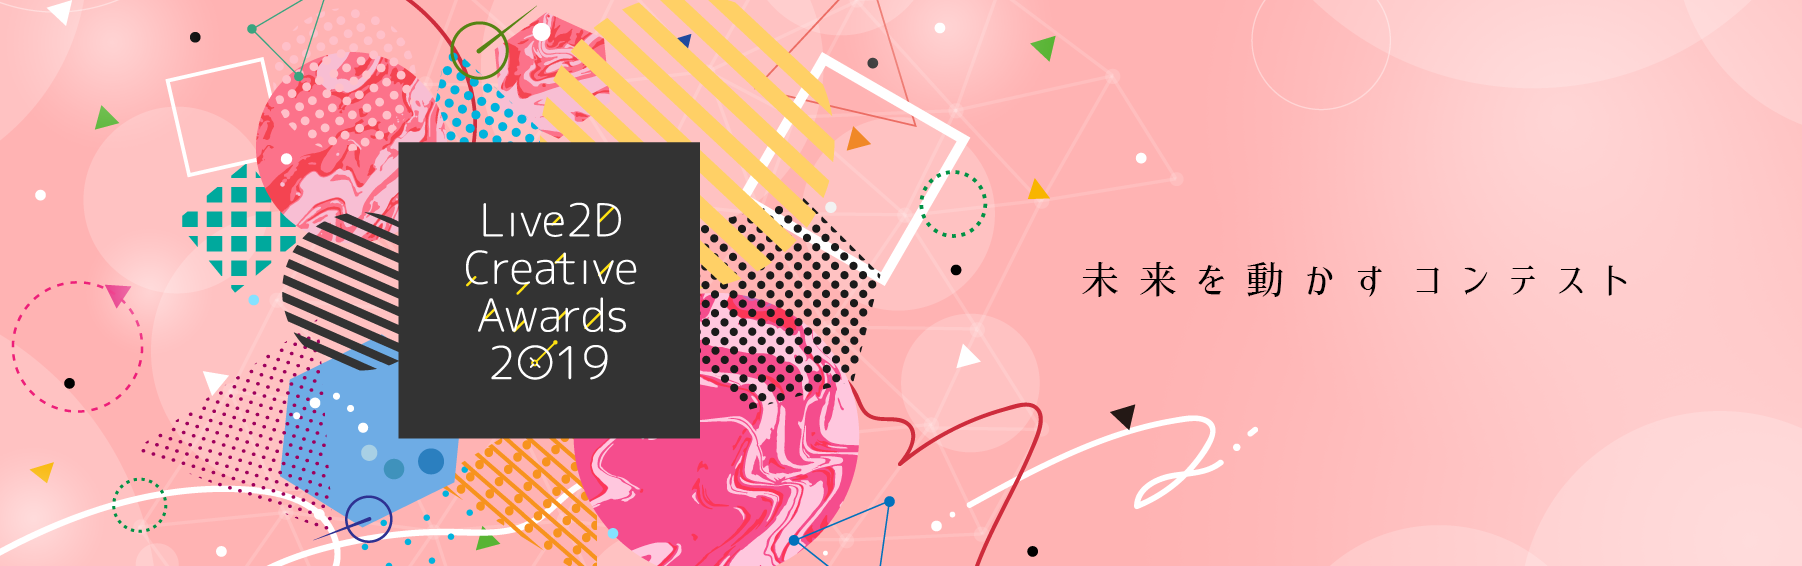 [Award-winning work] Presenting the award-winning works at Live2D Creative Awards 2019, announced at alive 2019